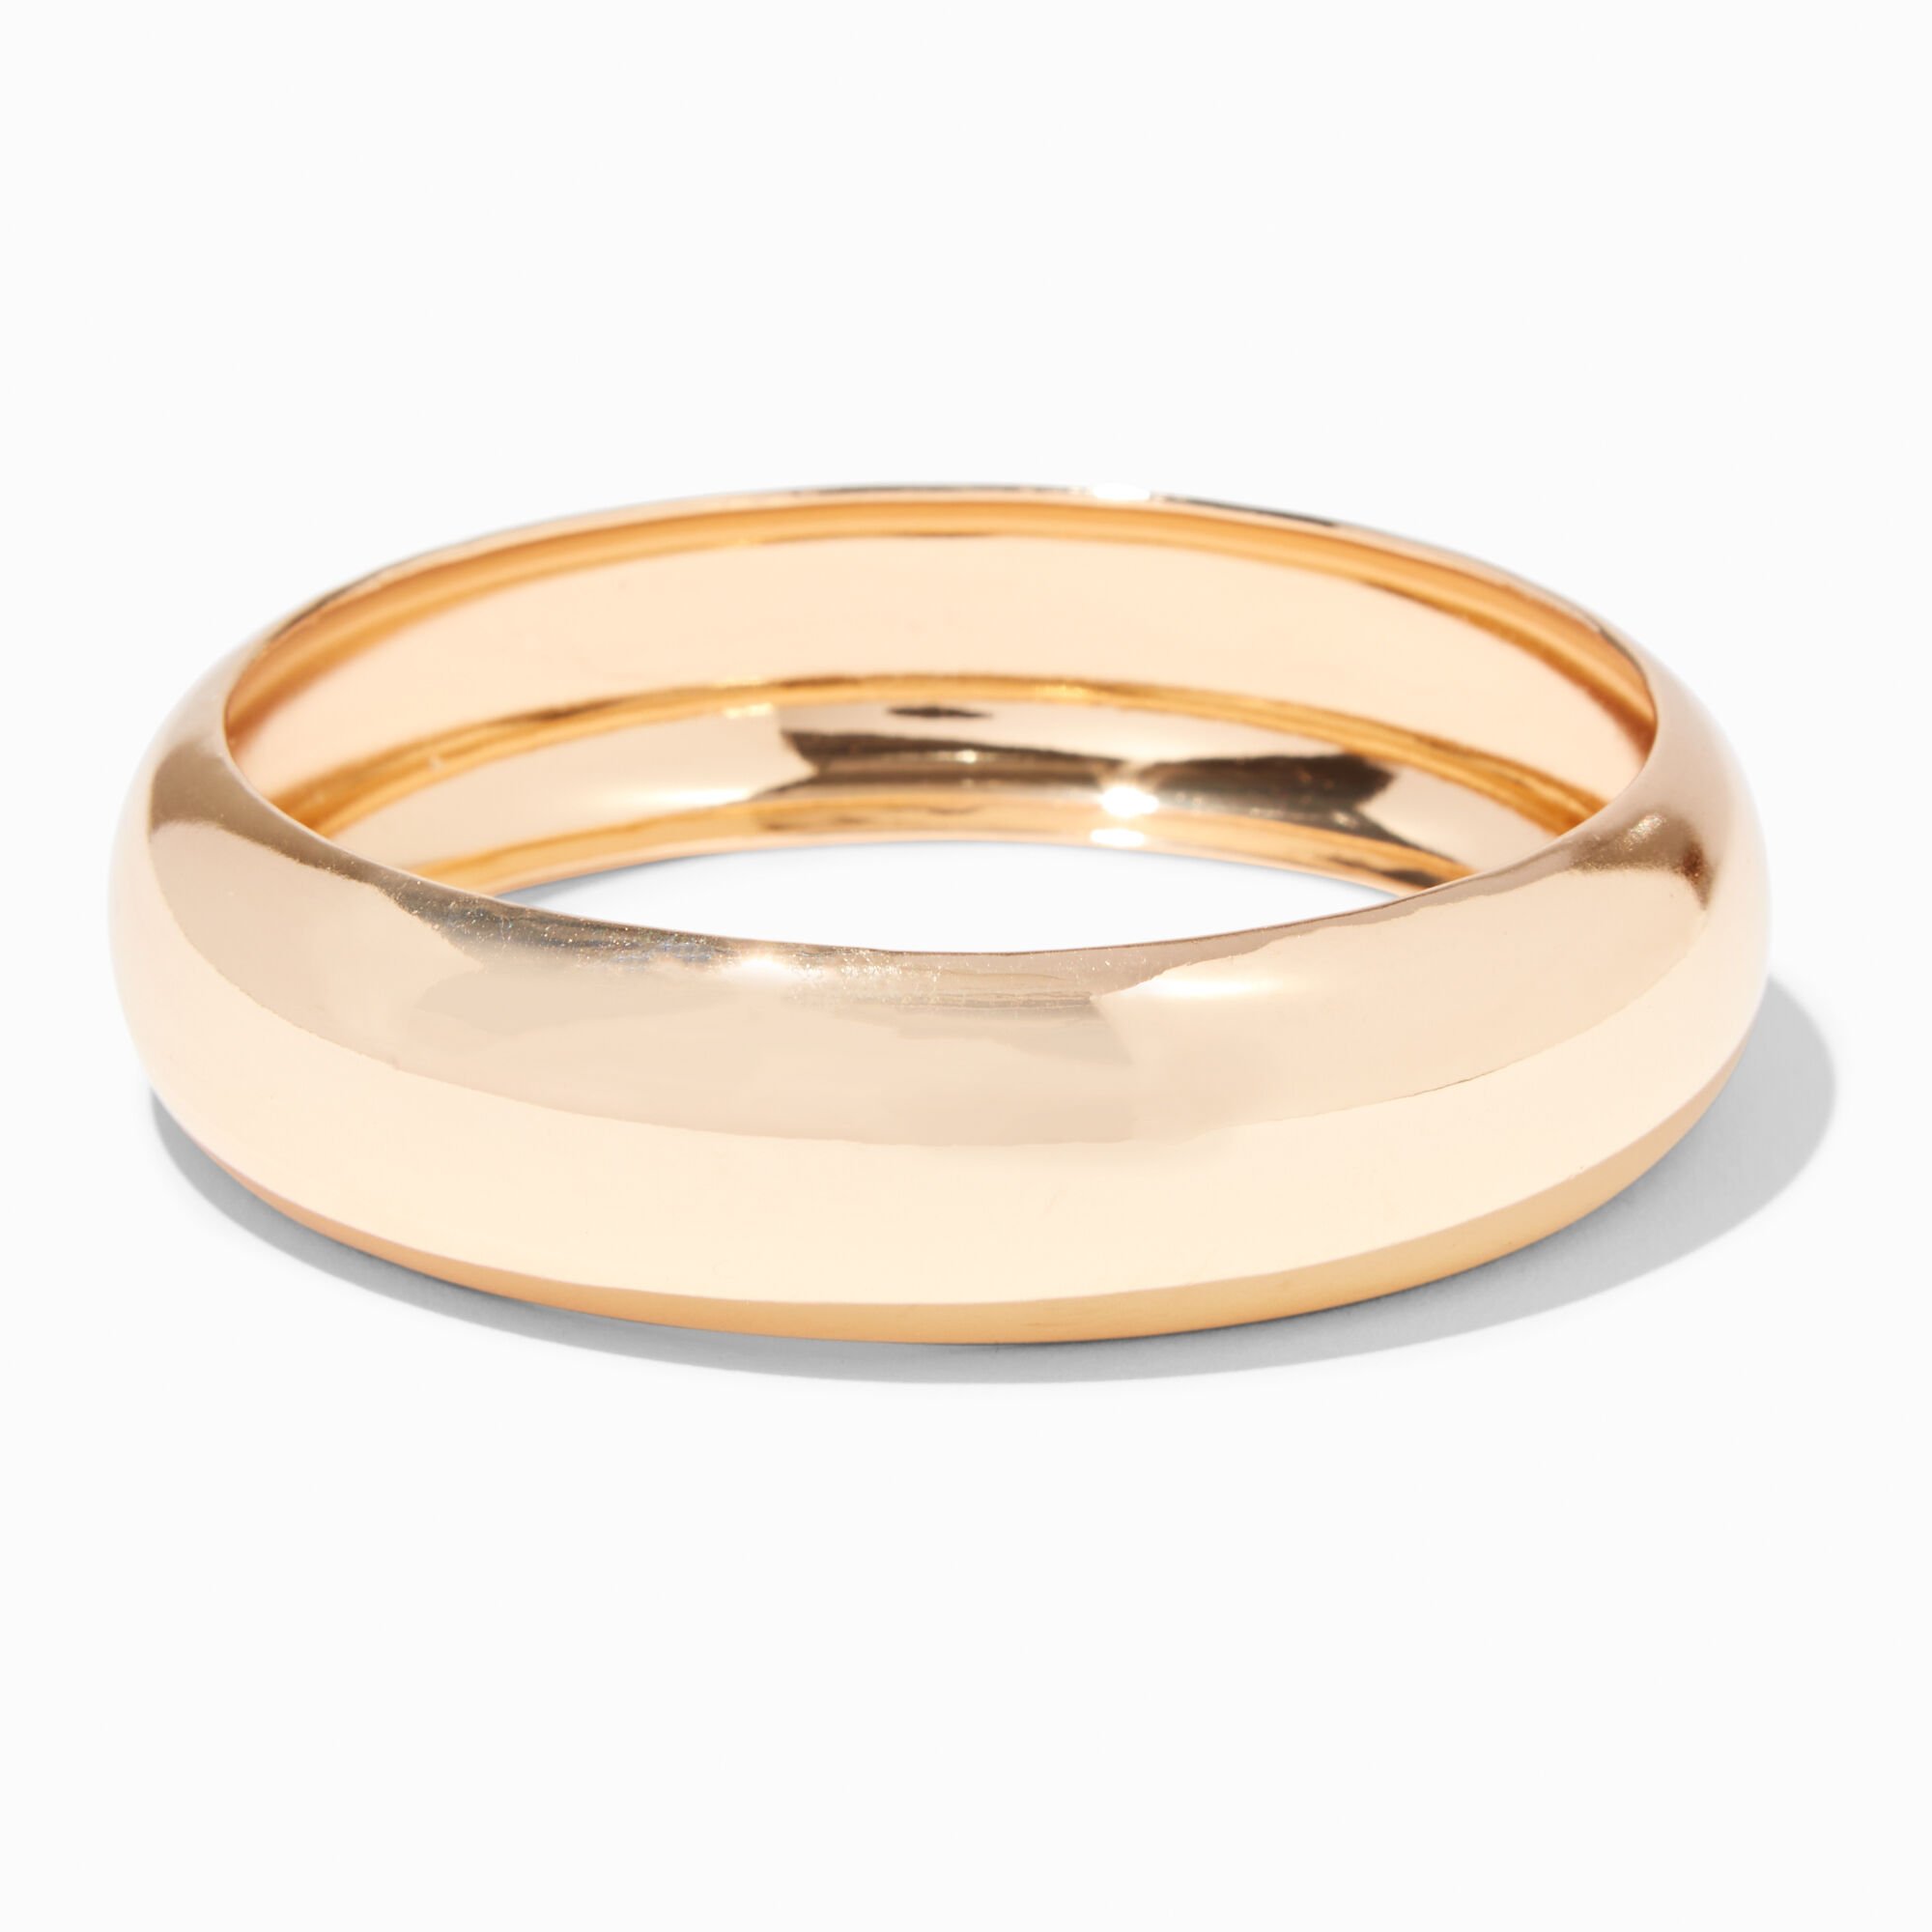 View Claires Tone Chunky Bangle Bracelet Gold information